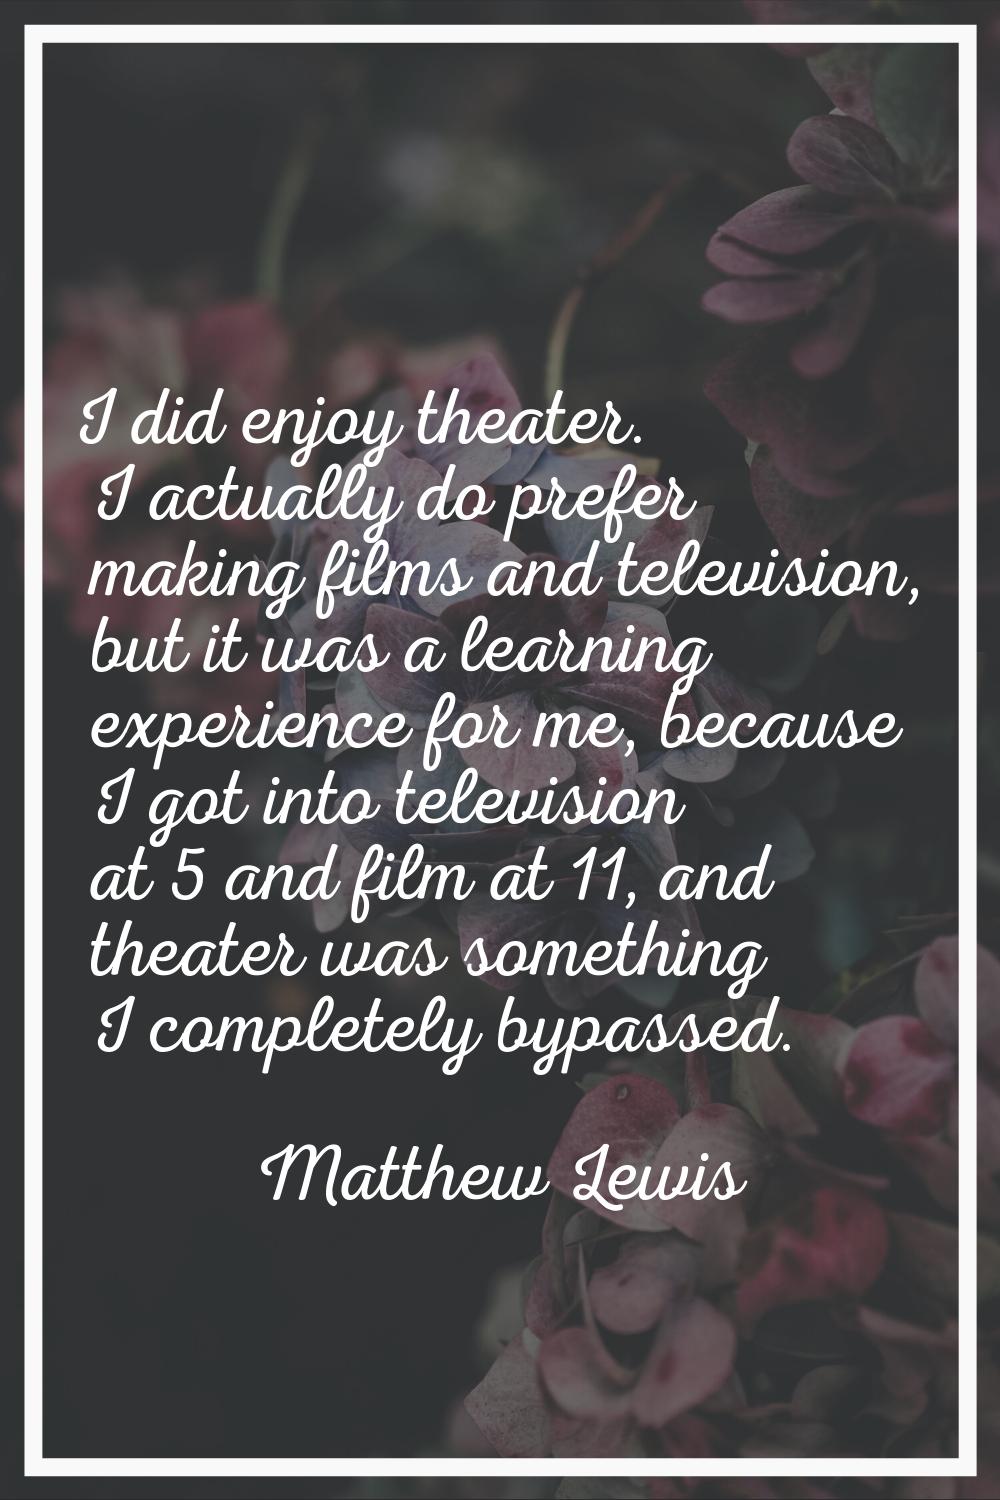 I did enjoy theater. I actually do prefer making films and television, but it was a learning experi